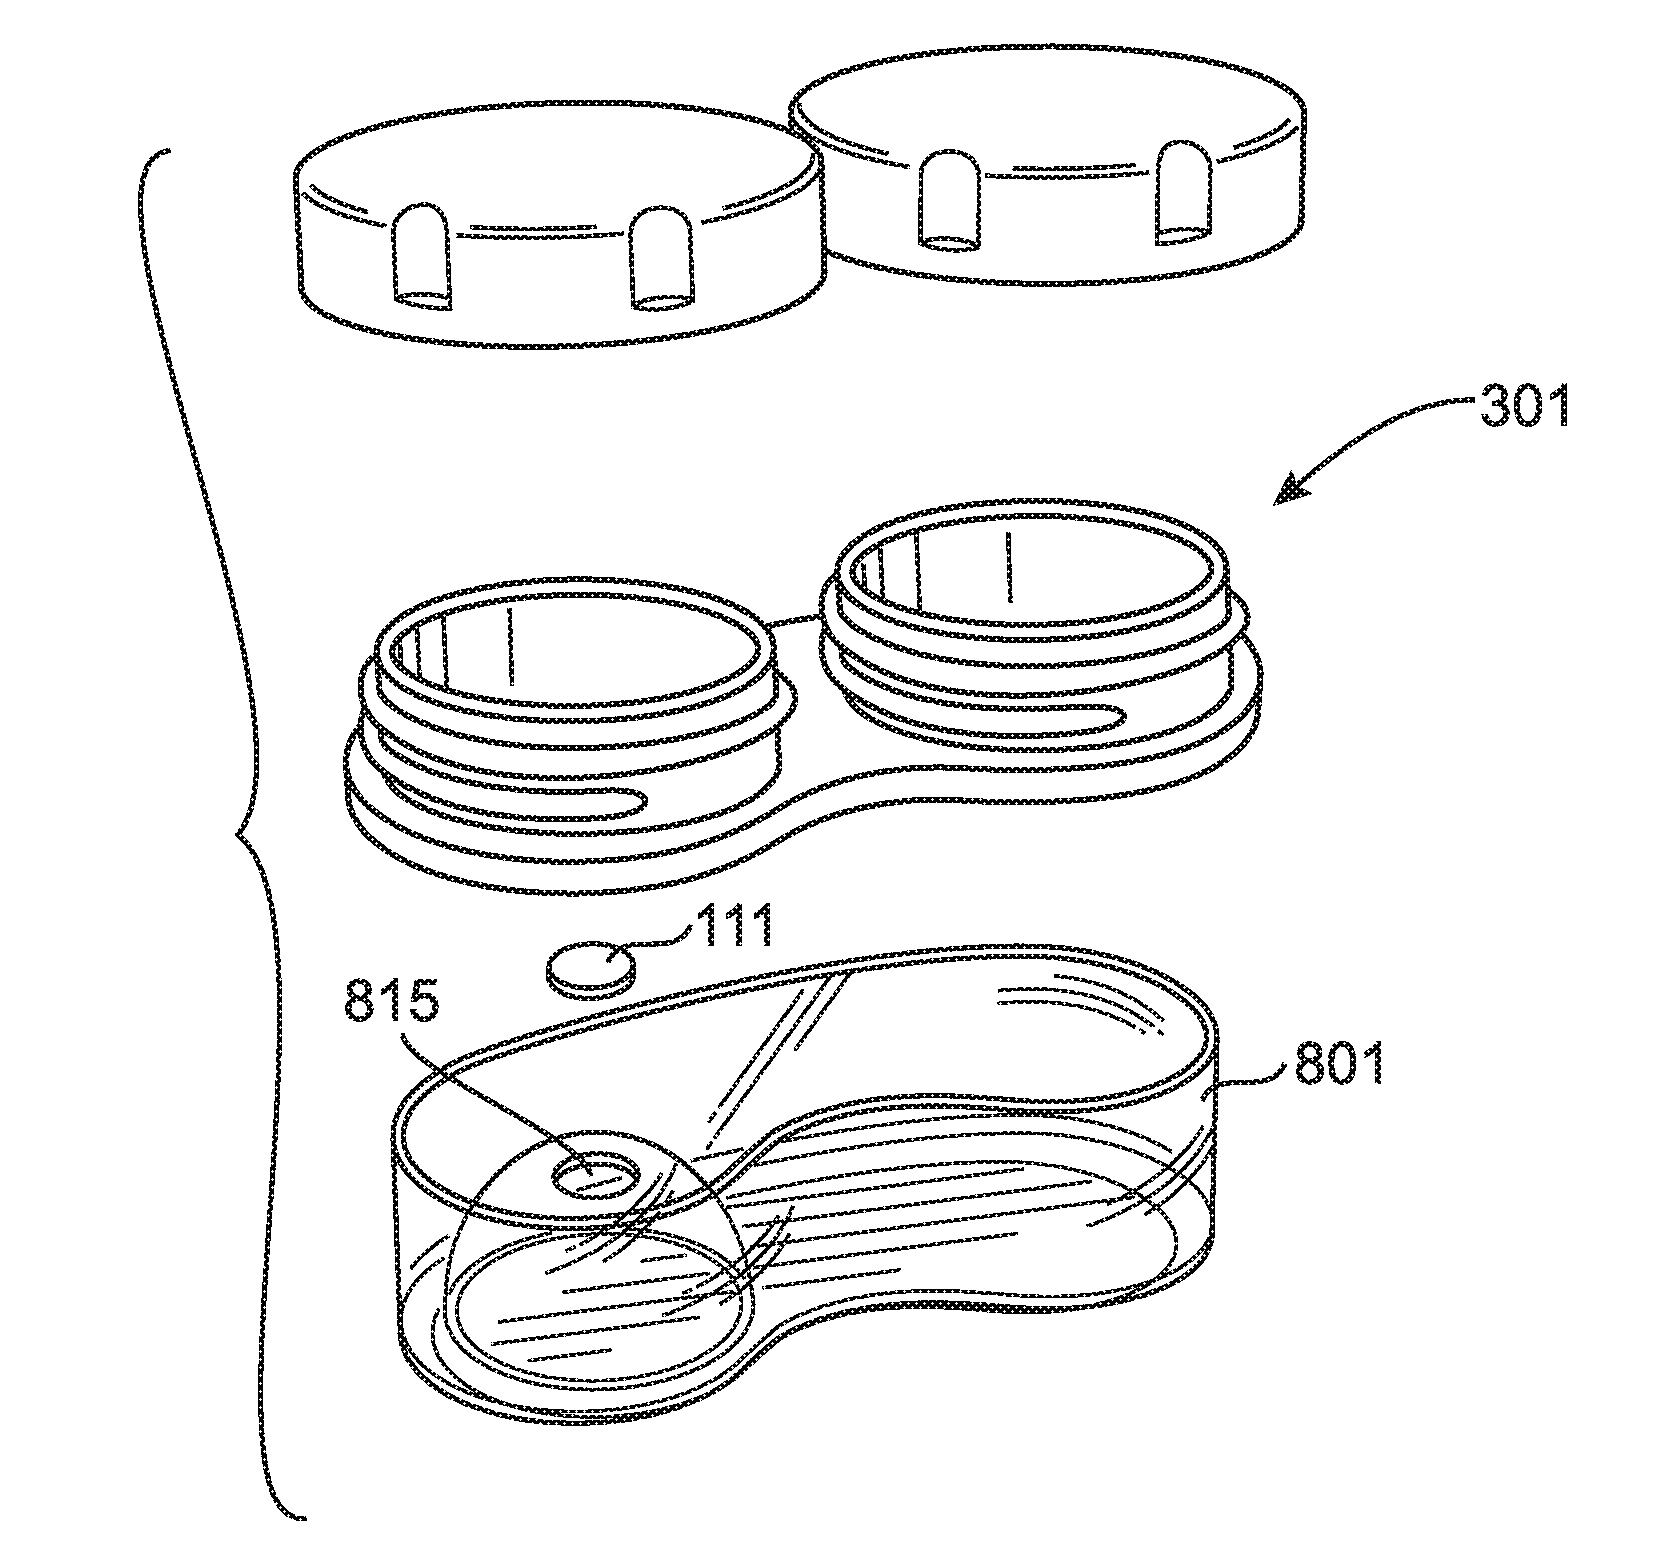 Contact Lens Case with Predetermined Life Span for Safety